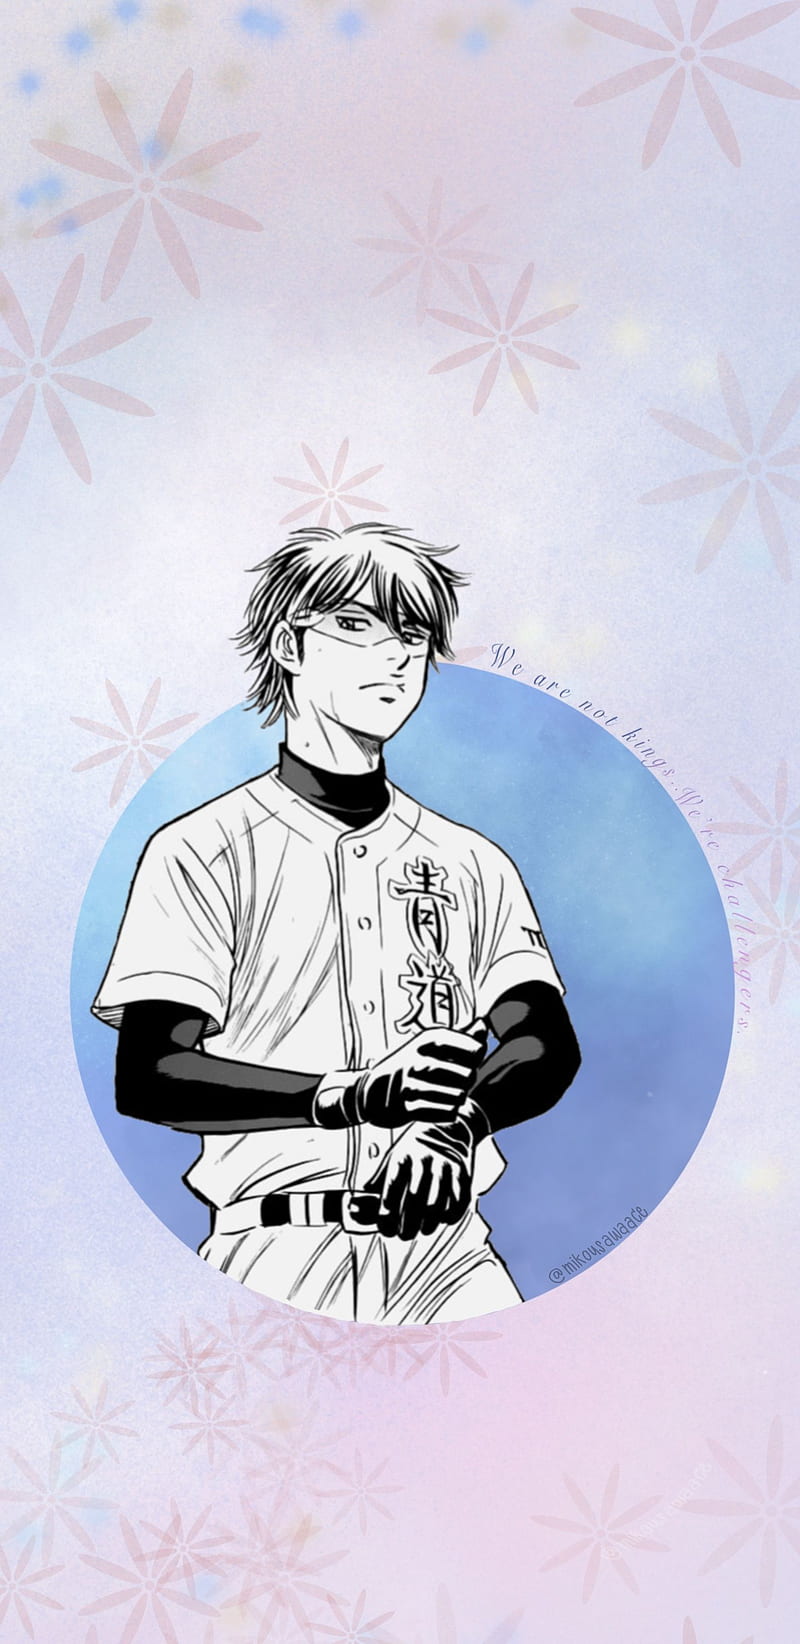 Free Diamond No Ace Anime APK Download For Android | GetJar